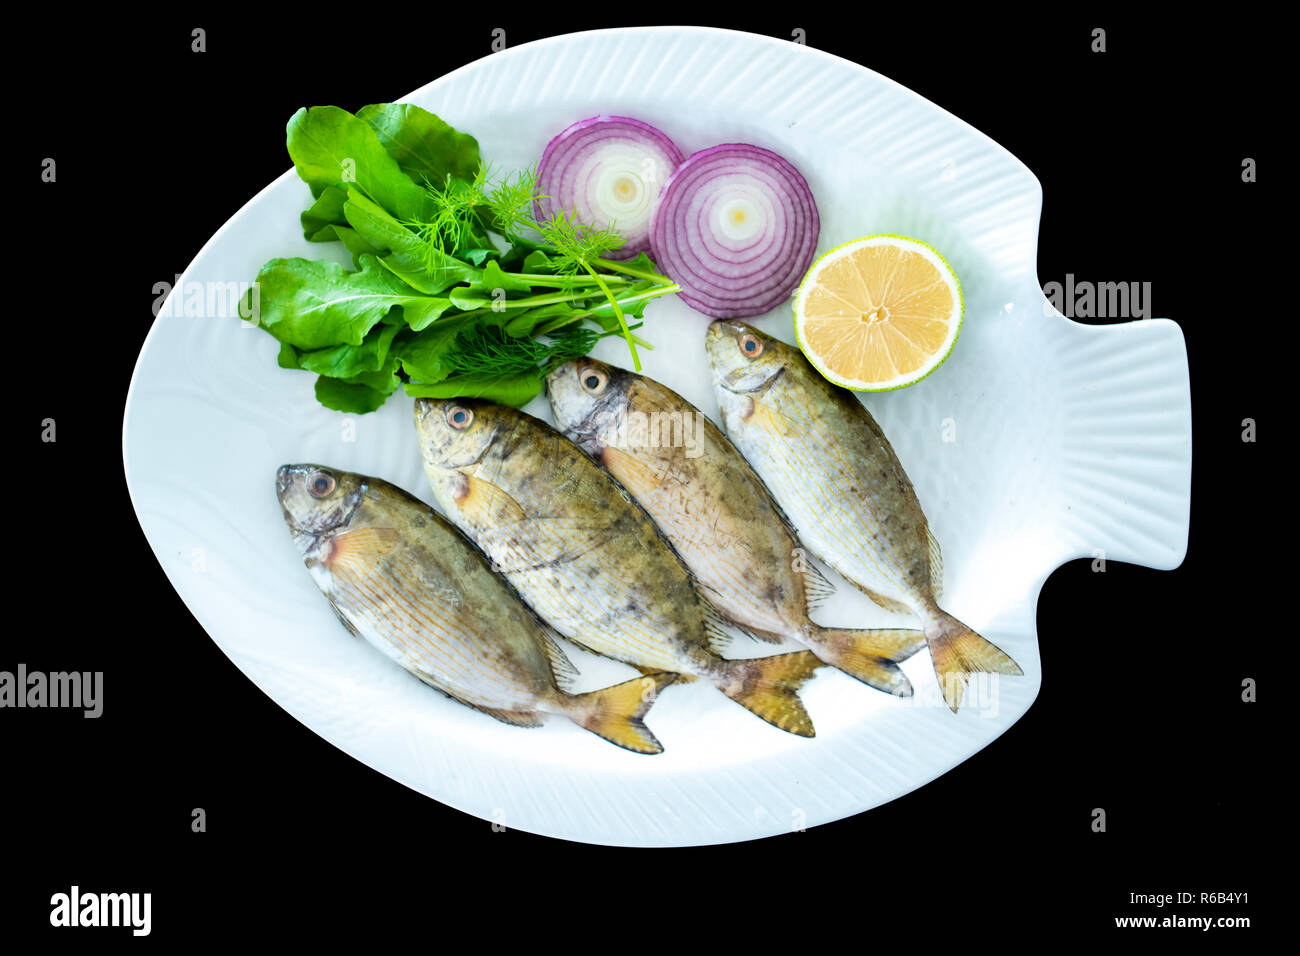 Fresh spotted spinefoot fish with rockets leaves served on white plate with black background Stock Photo